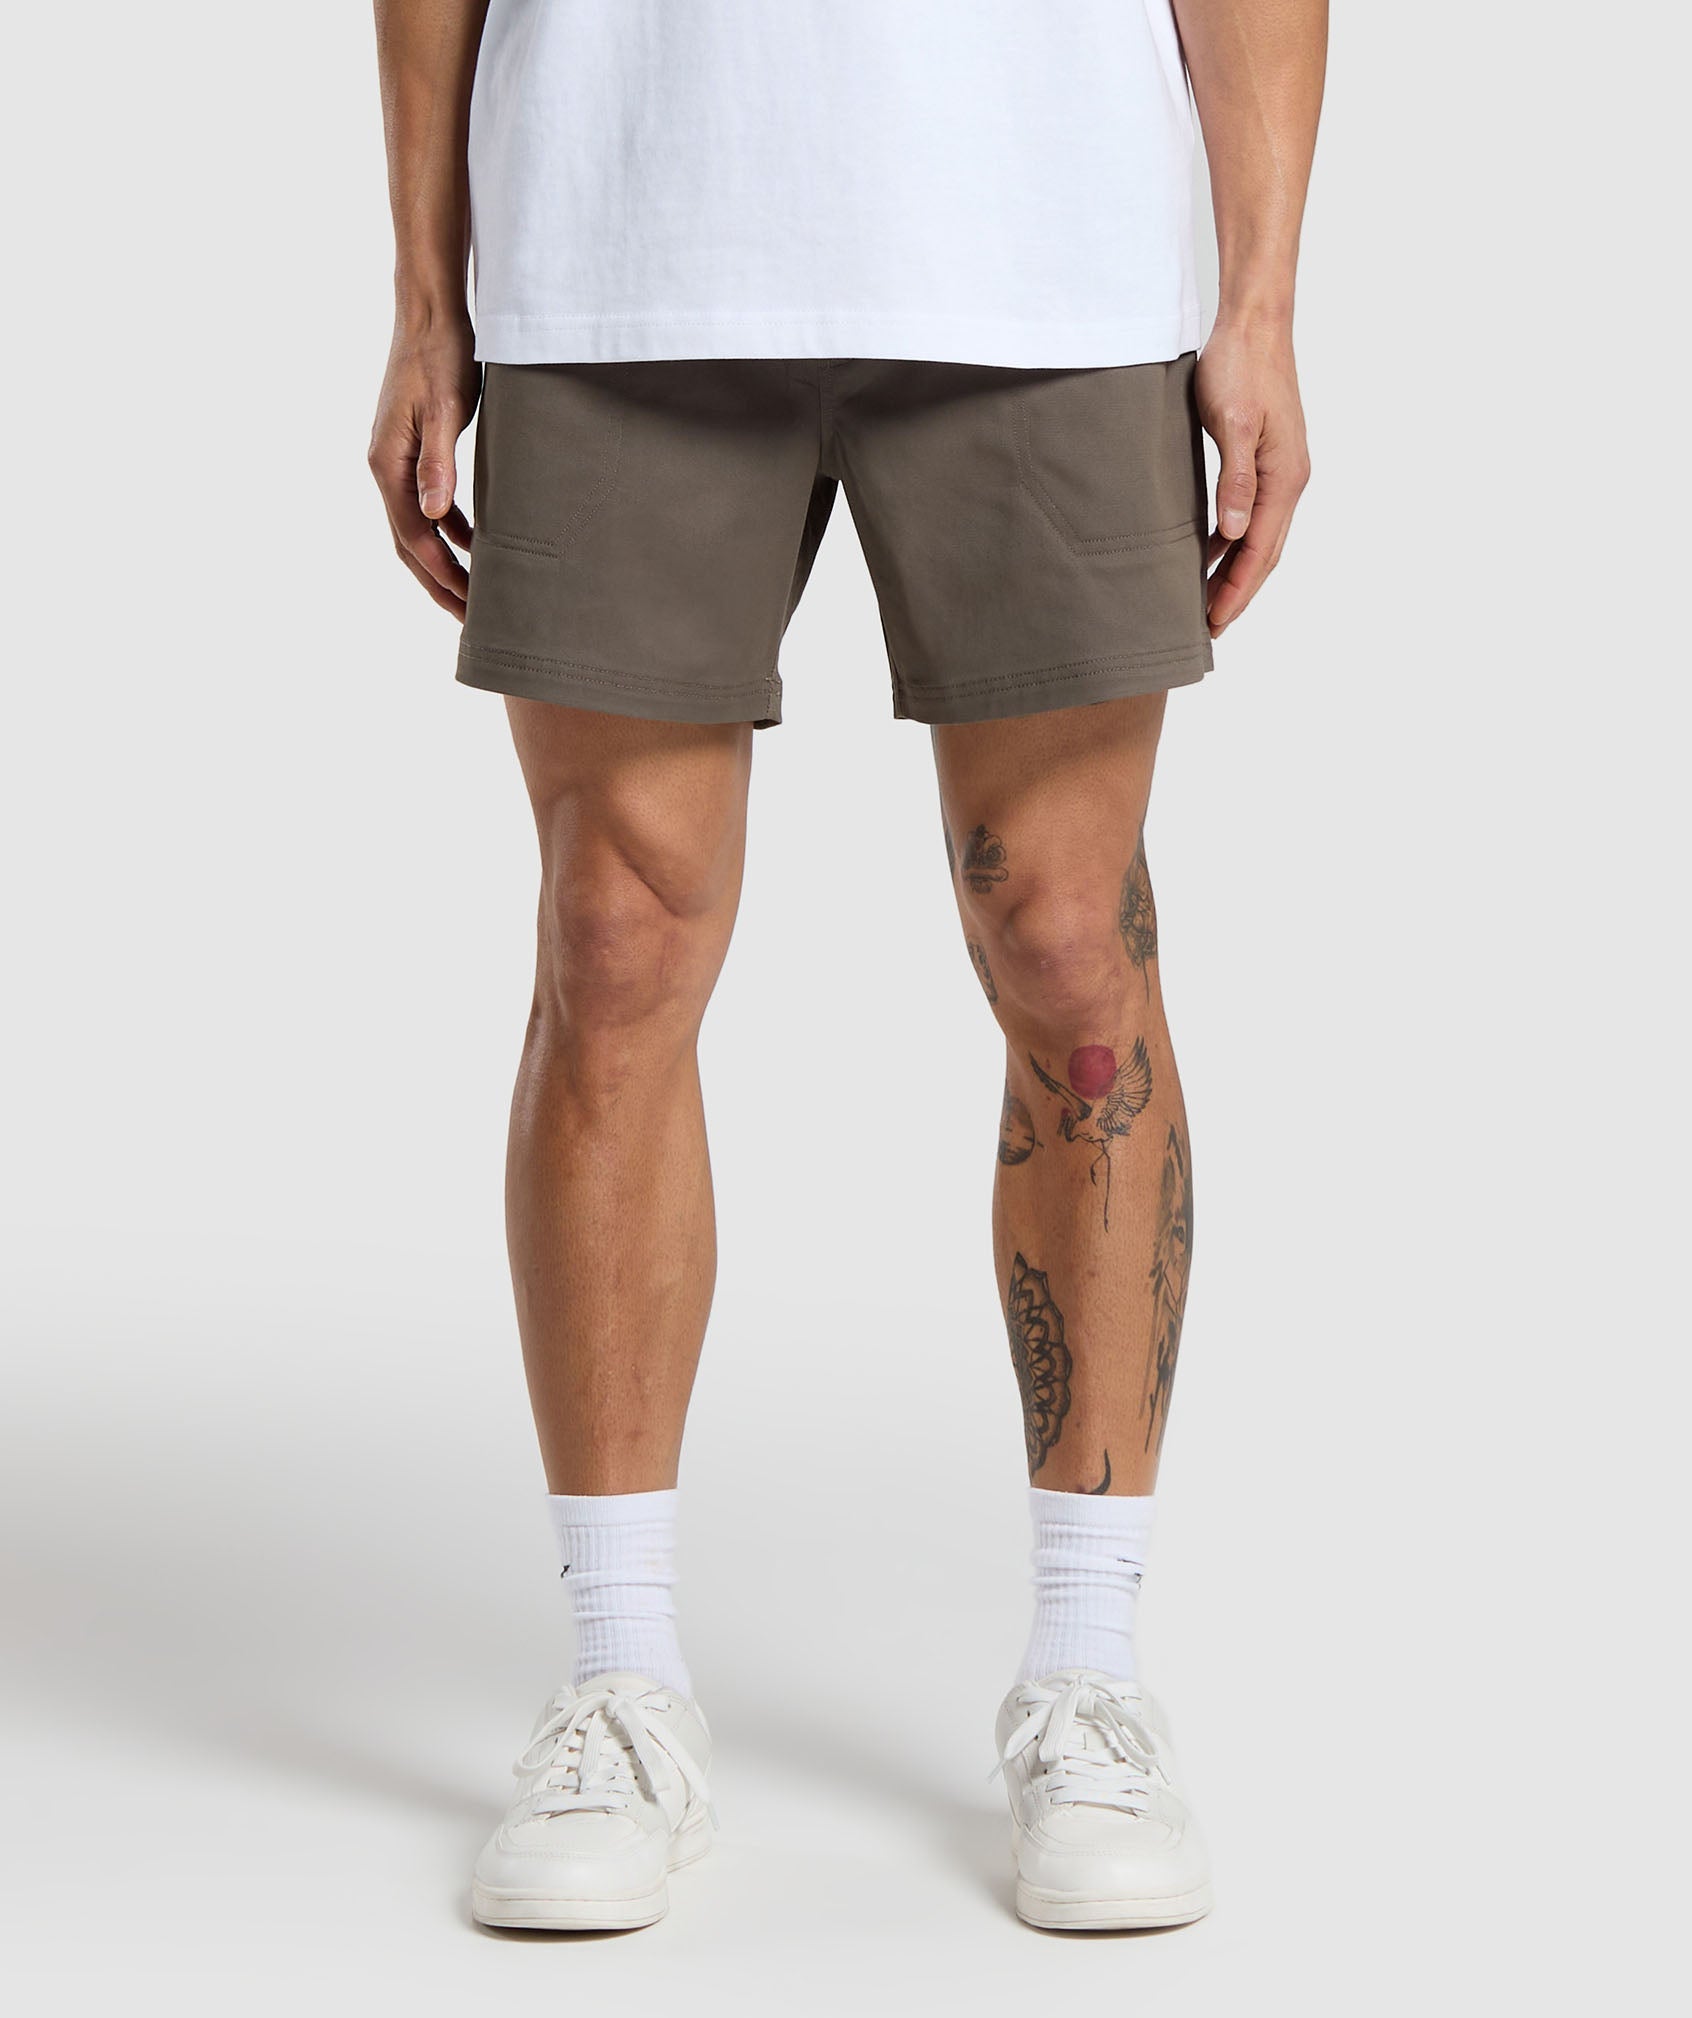 Rest Day Woven Shorts